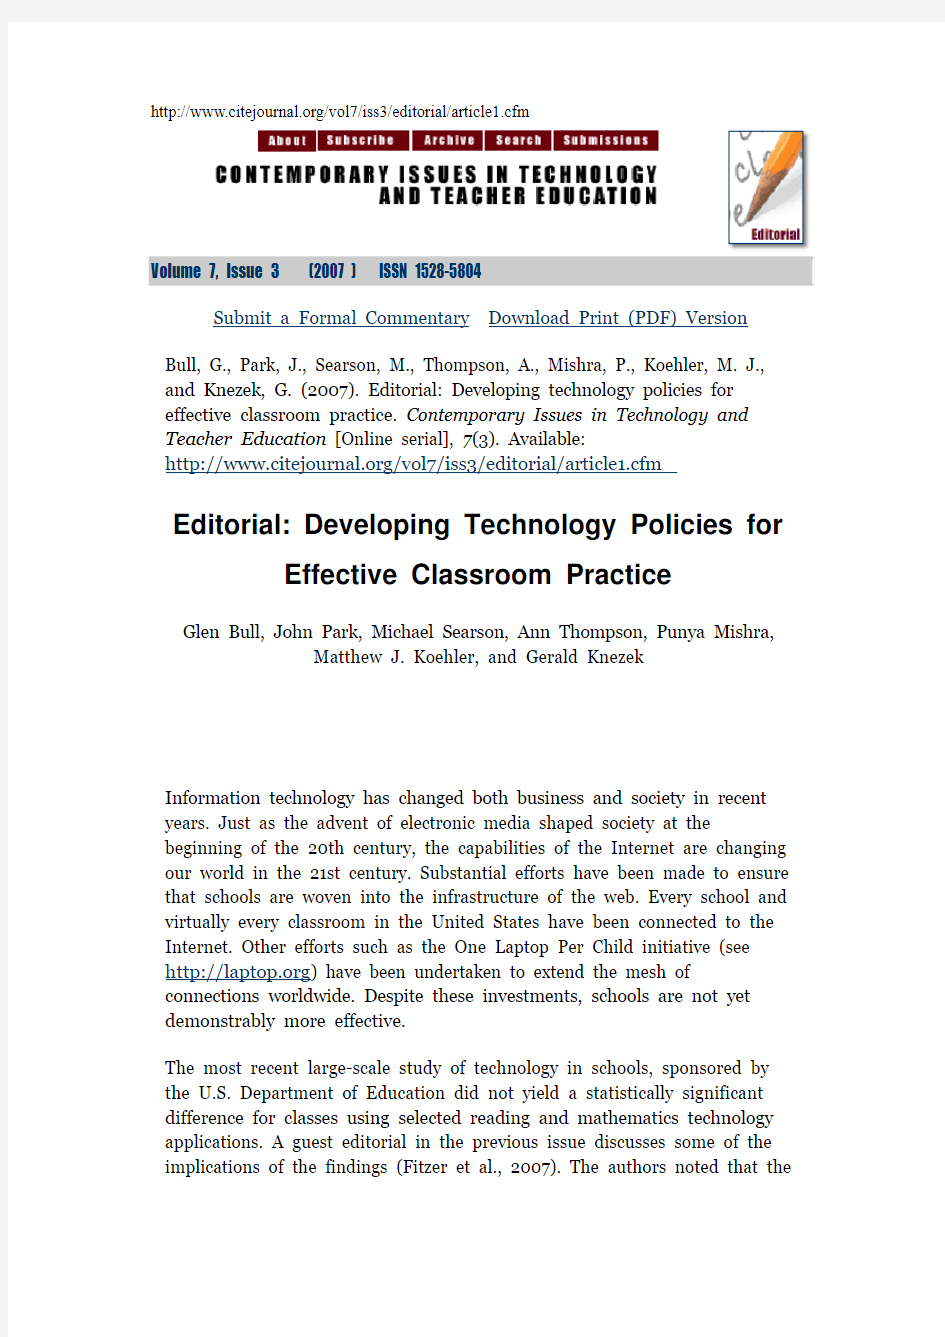 Editorial Developing technology policies for effective classroom practice